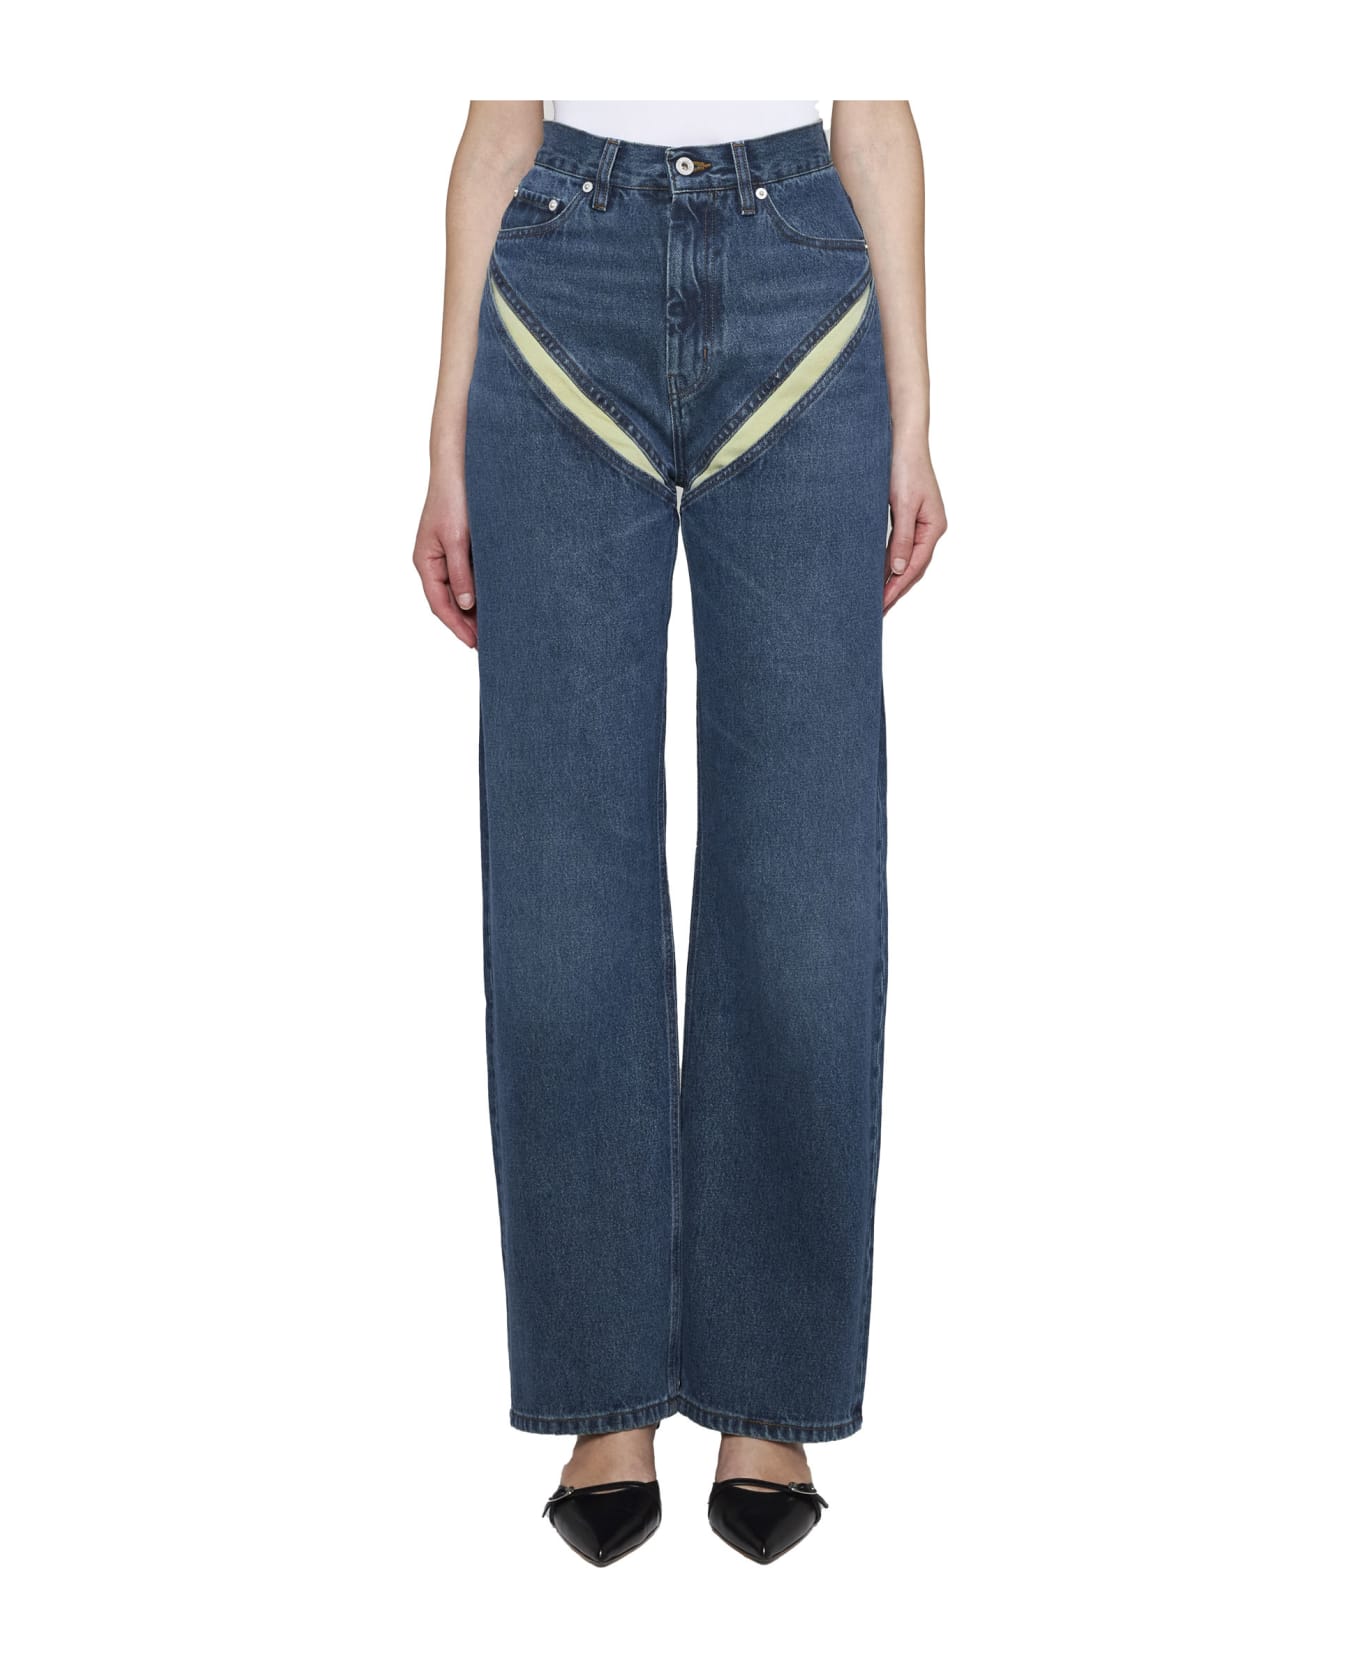 Y/Project Jeans - Evergreen vintage blue デニム